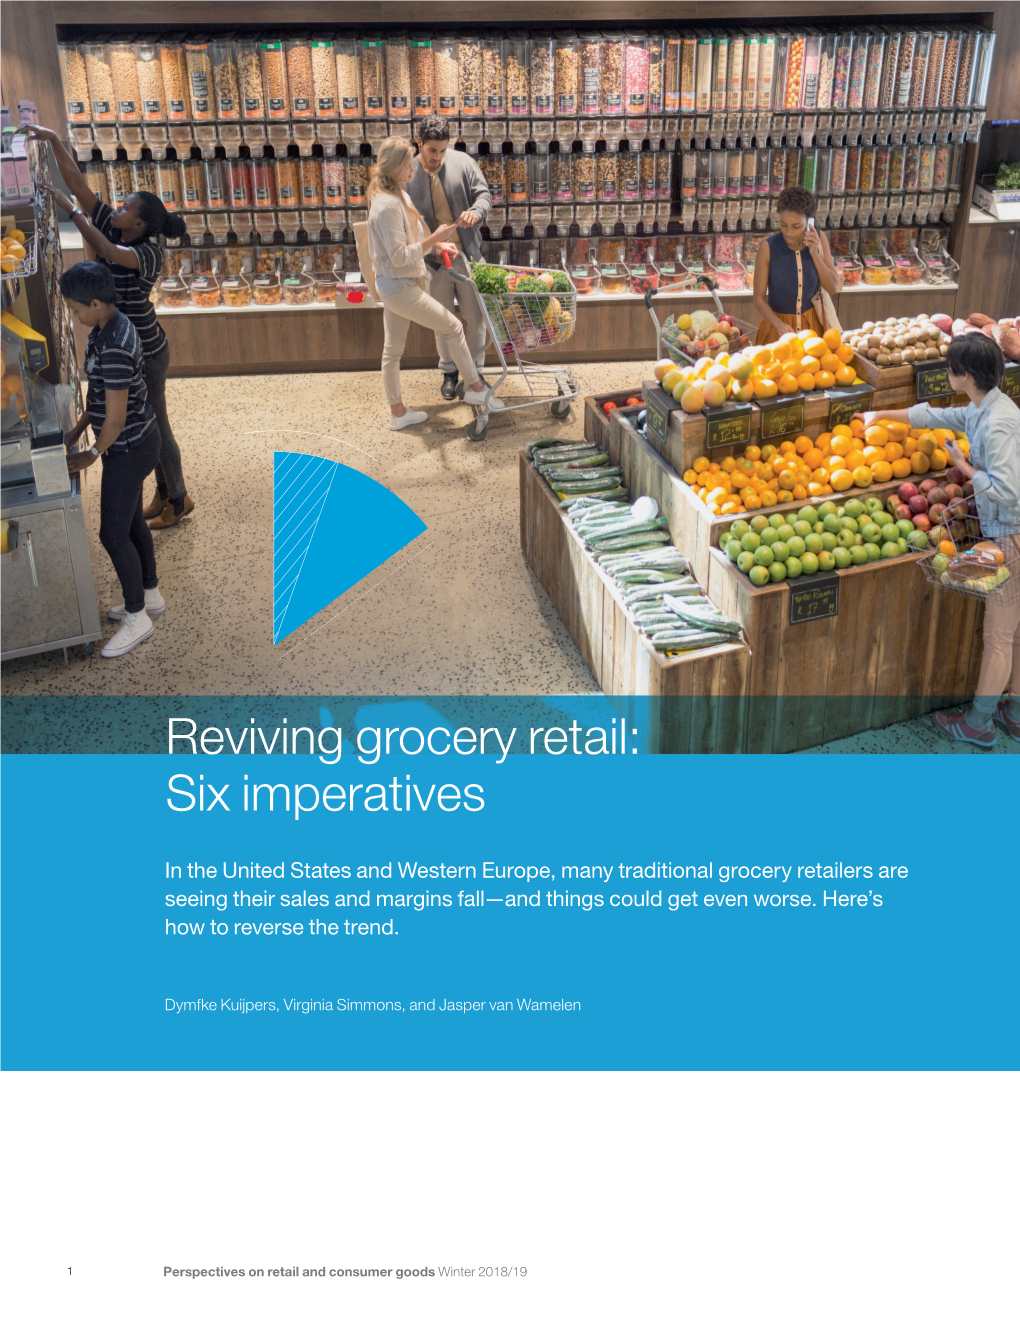 Reviving Grocery Retail: Six Imperatives